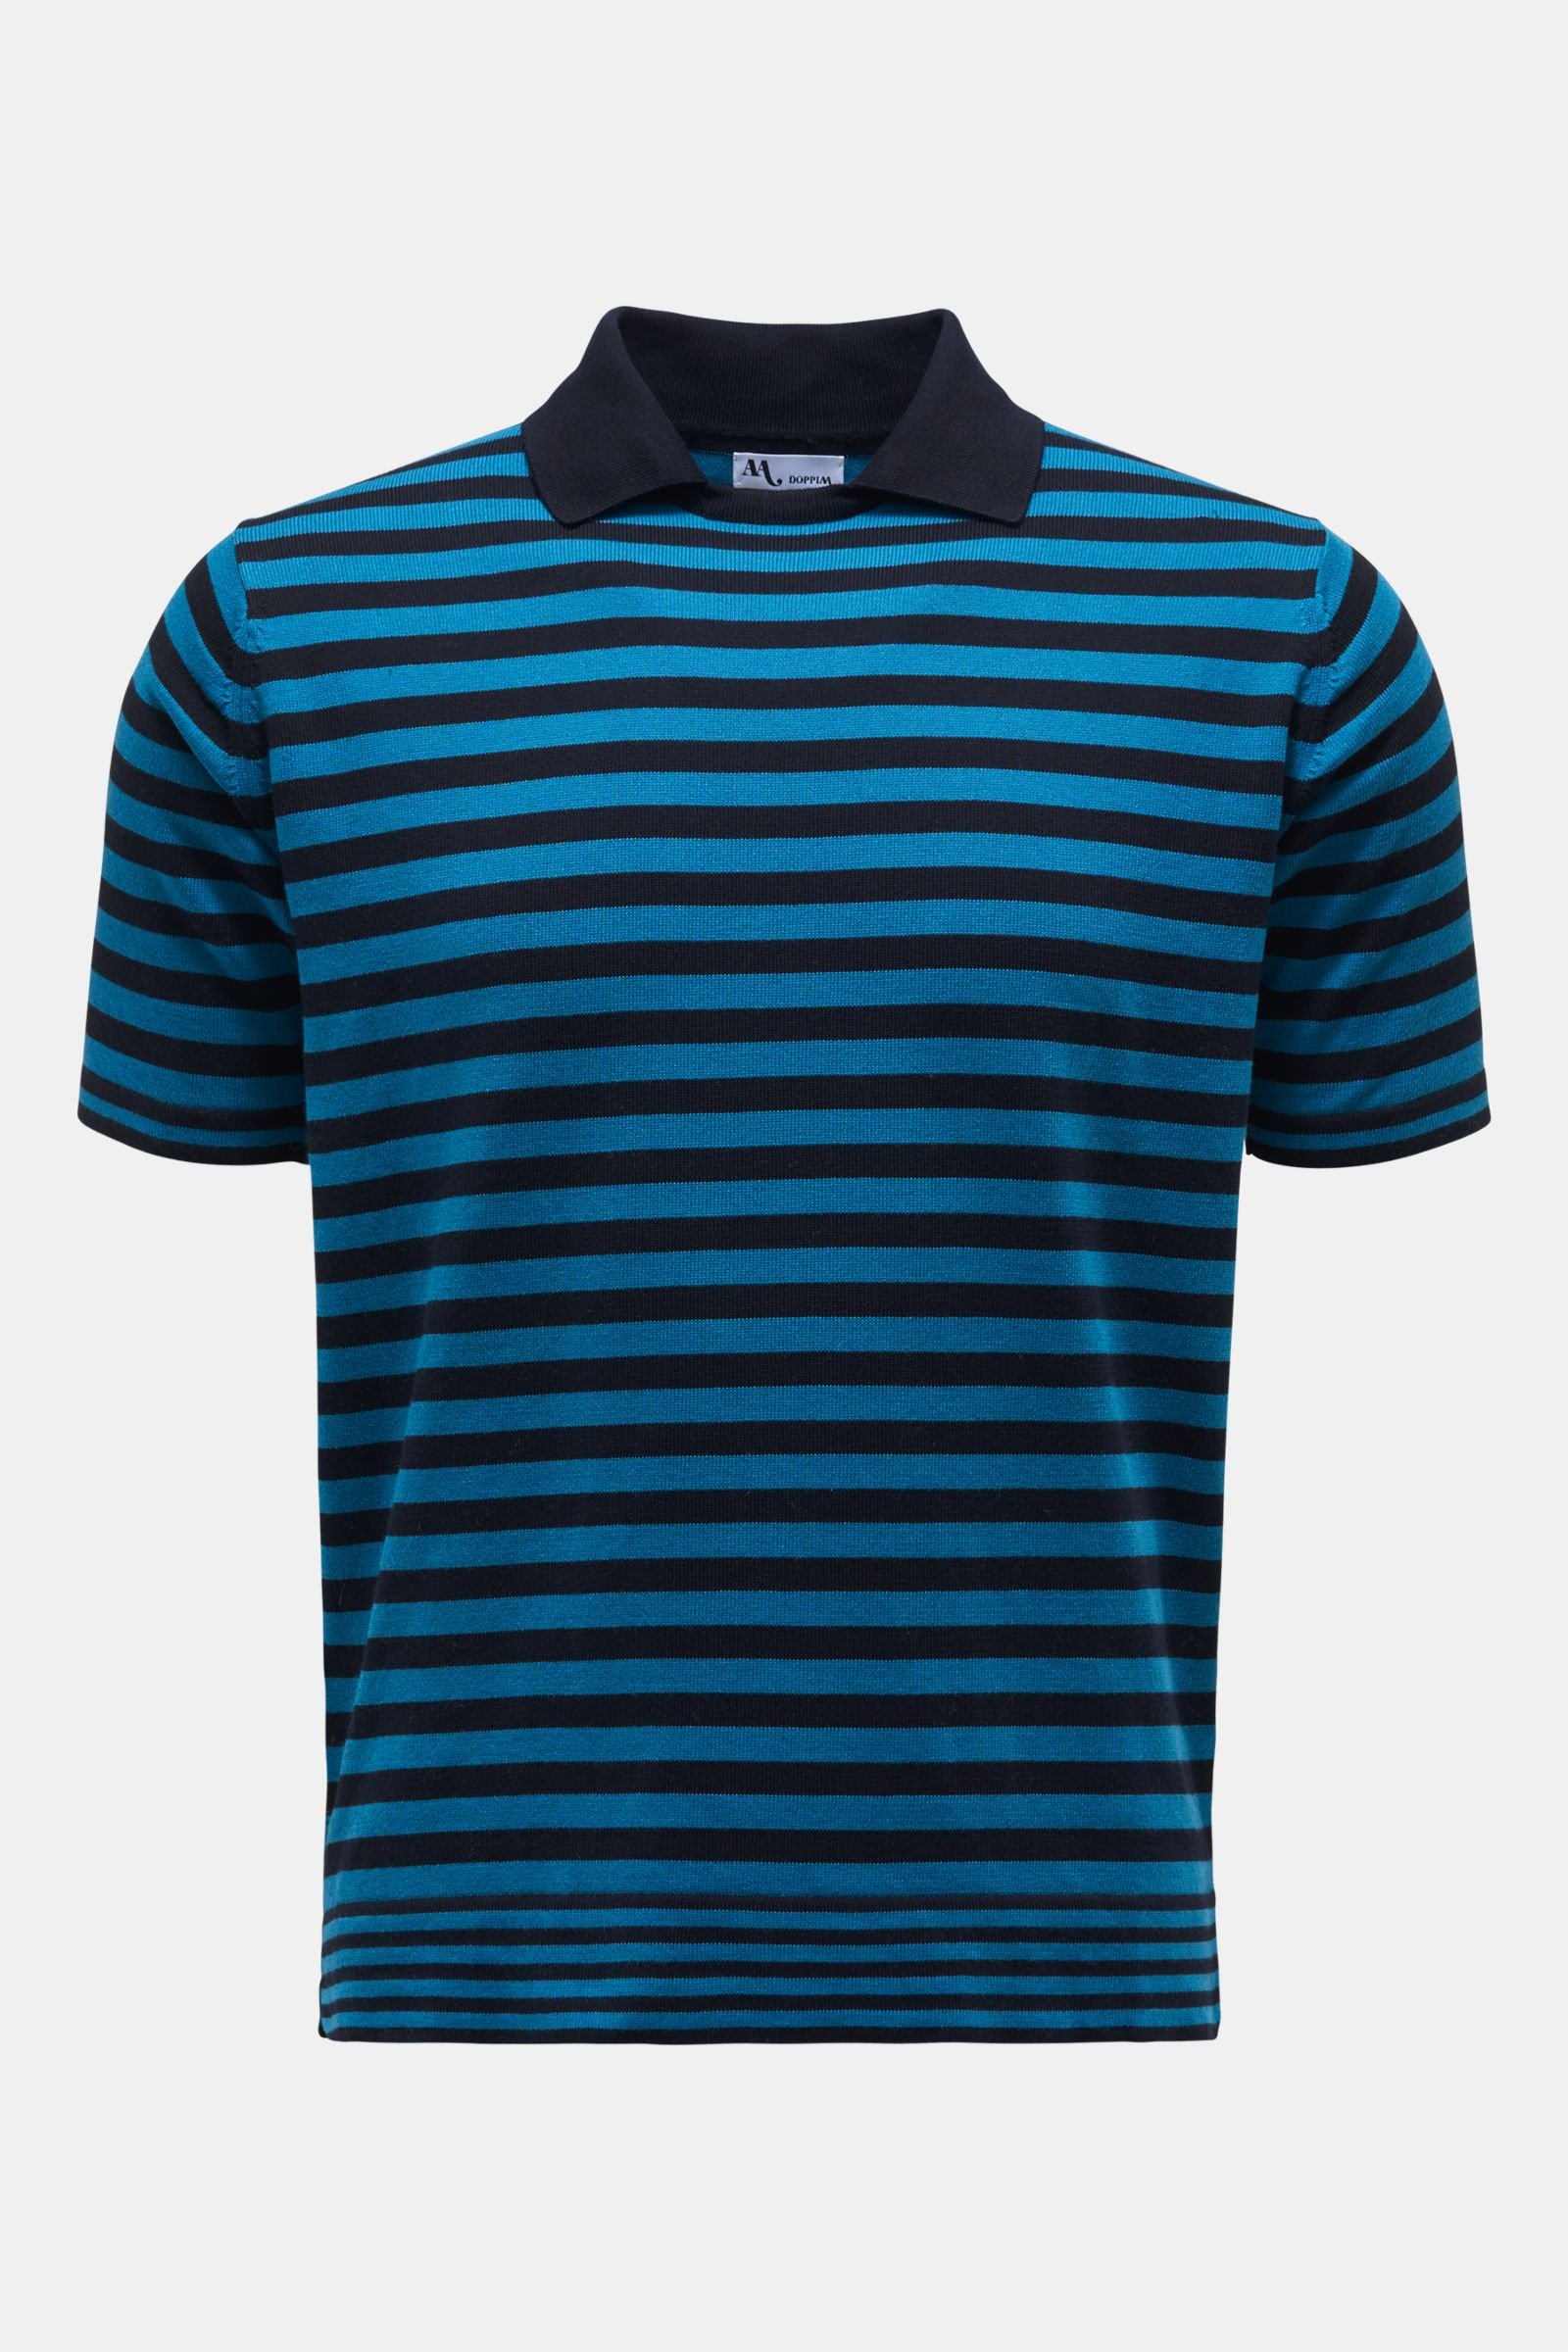 Short sleeve knit polo 'Aardesia' navy/teal striped